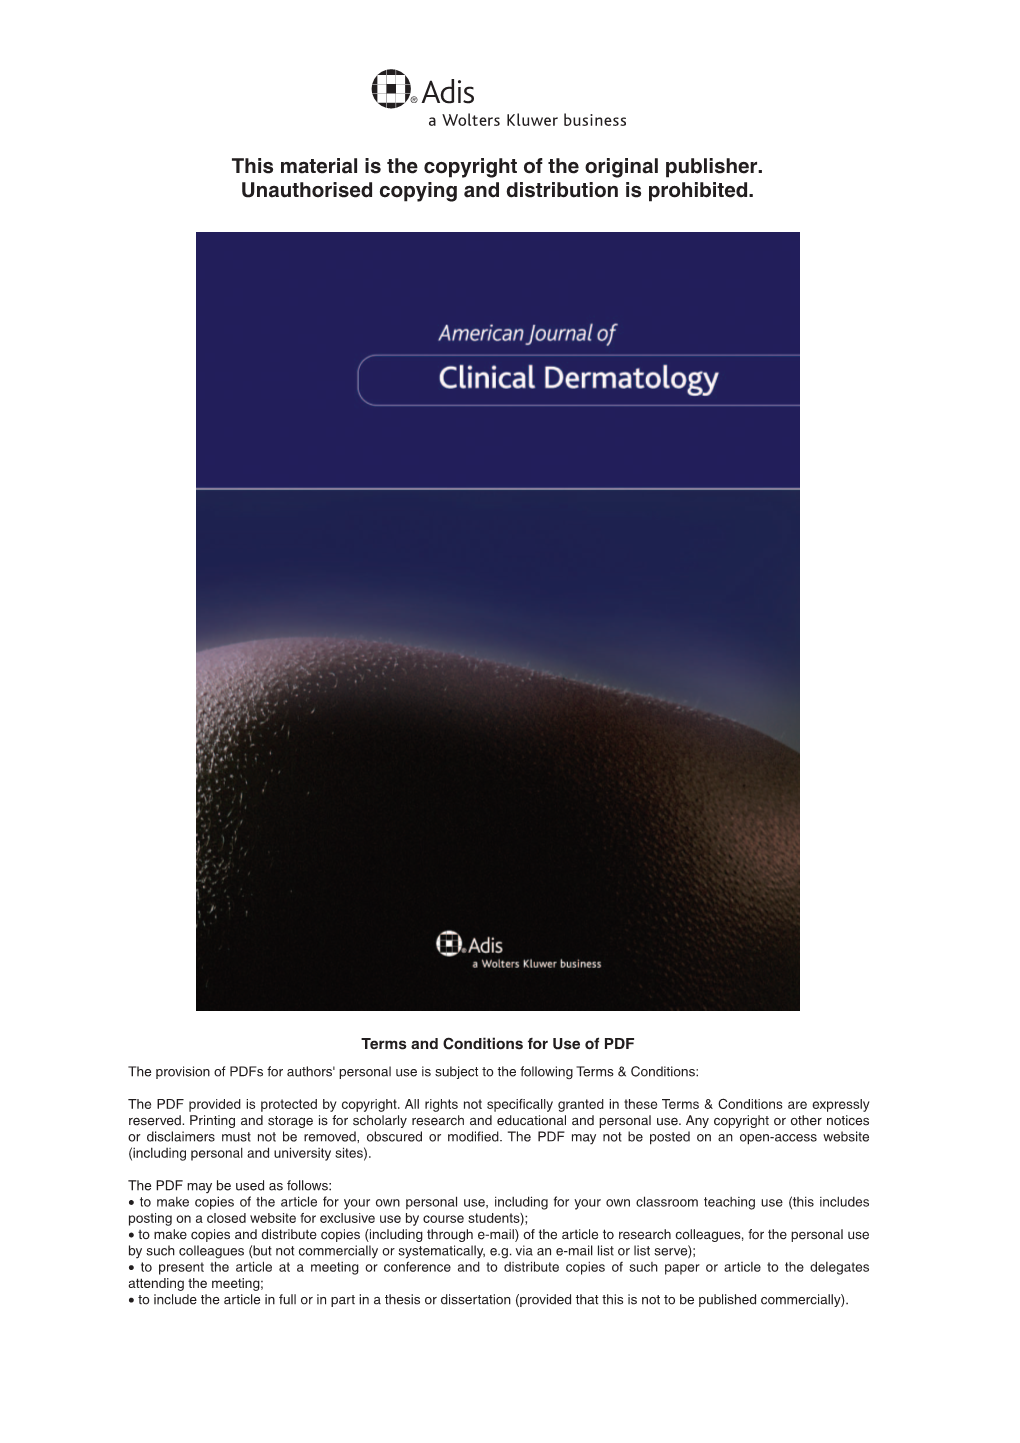 American Journal of Clinical Dermatology 2010;